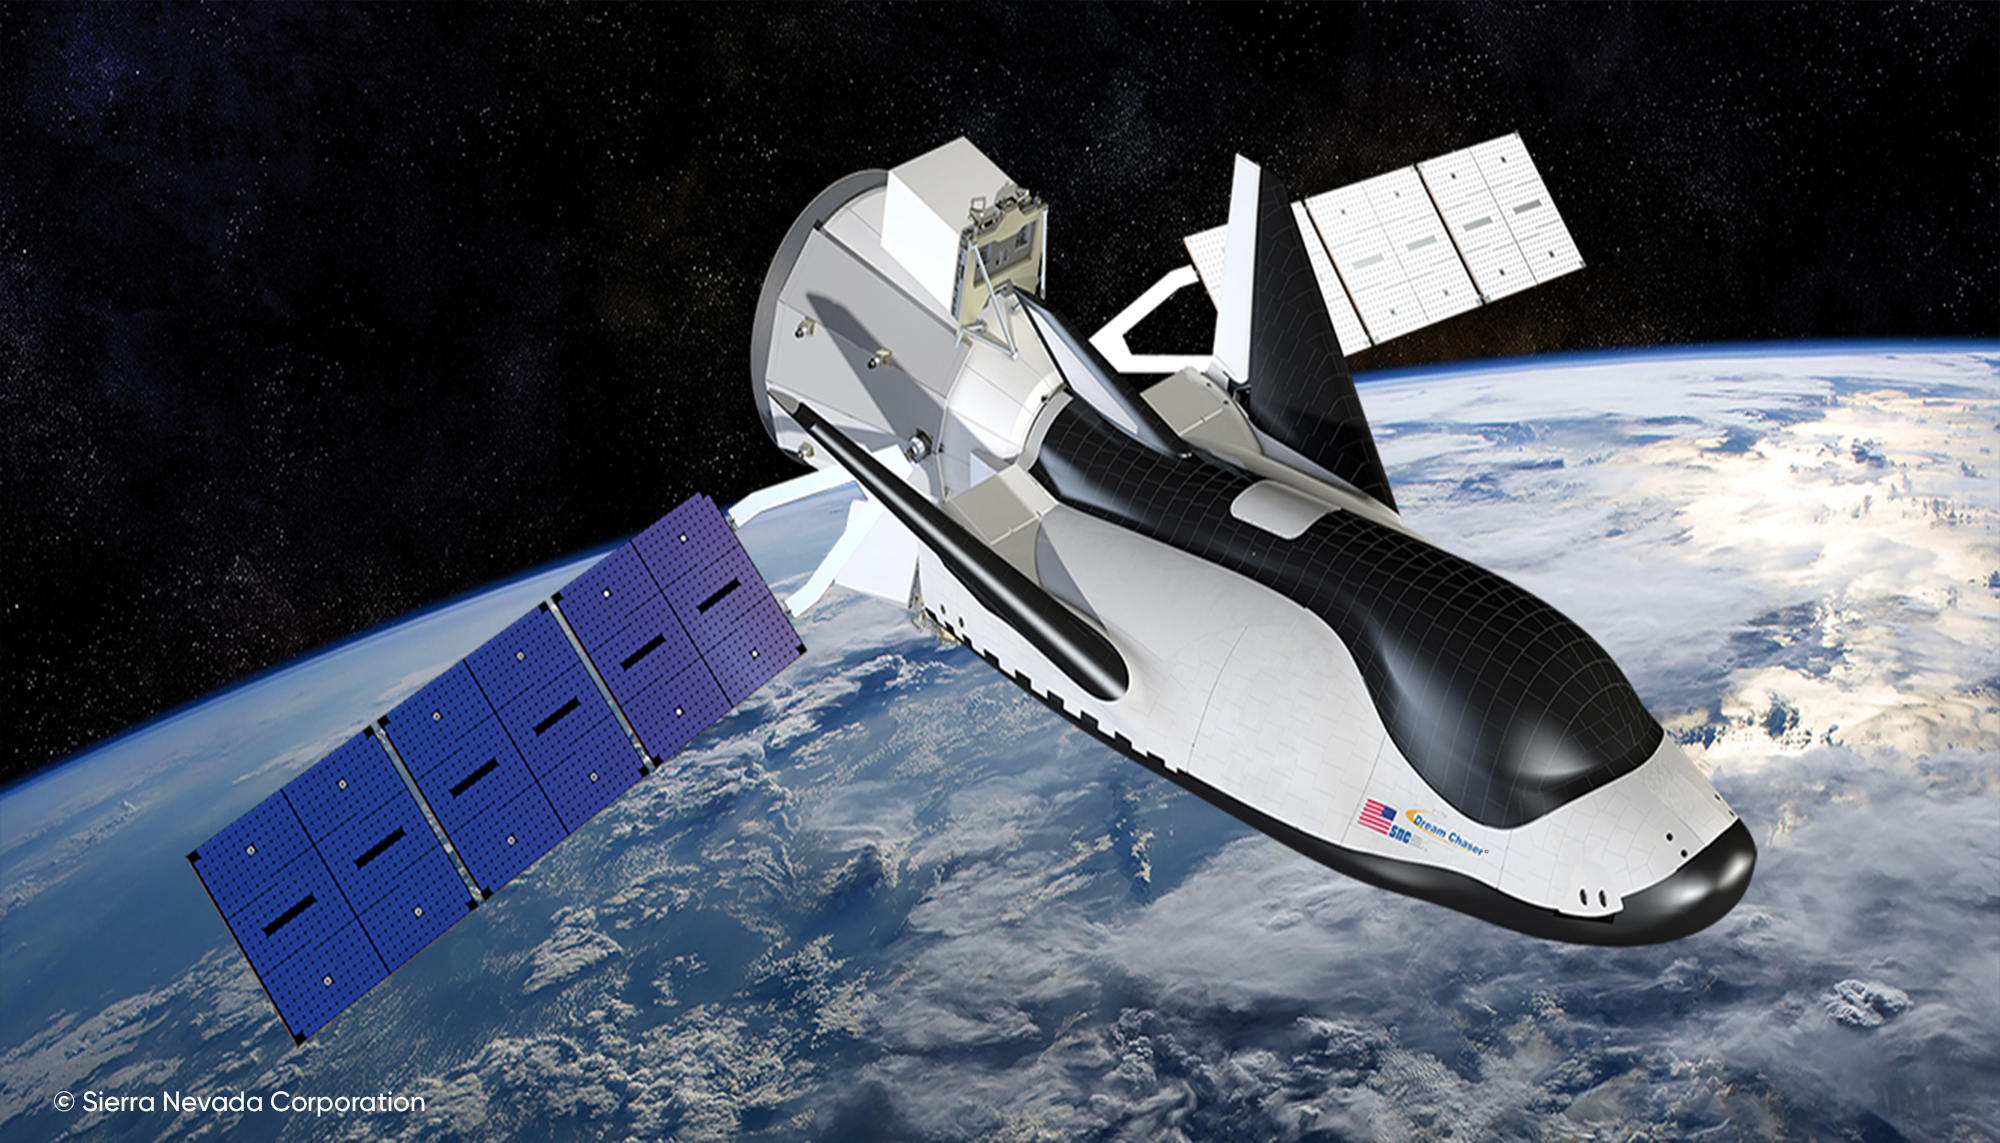 Sierra Nevada Unveils 'Shooting Star' Cargo Module for Dream Chaser Space Plane